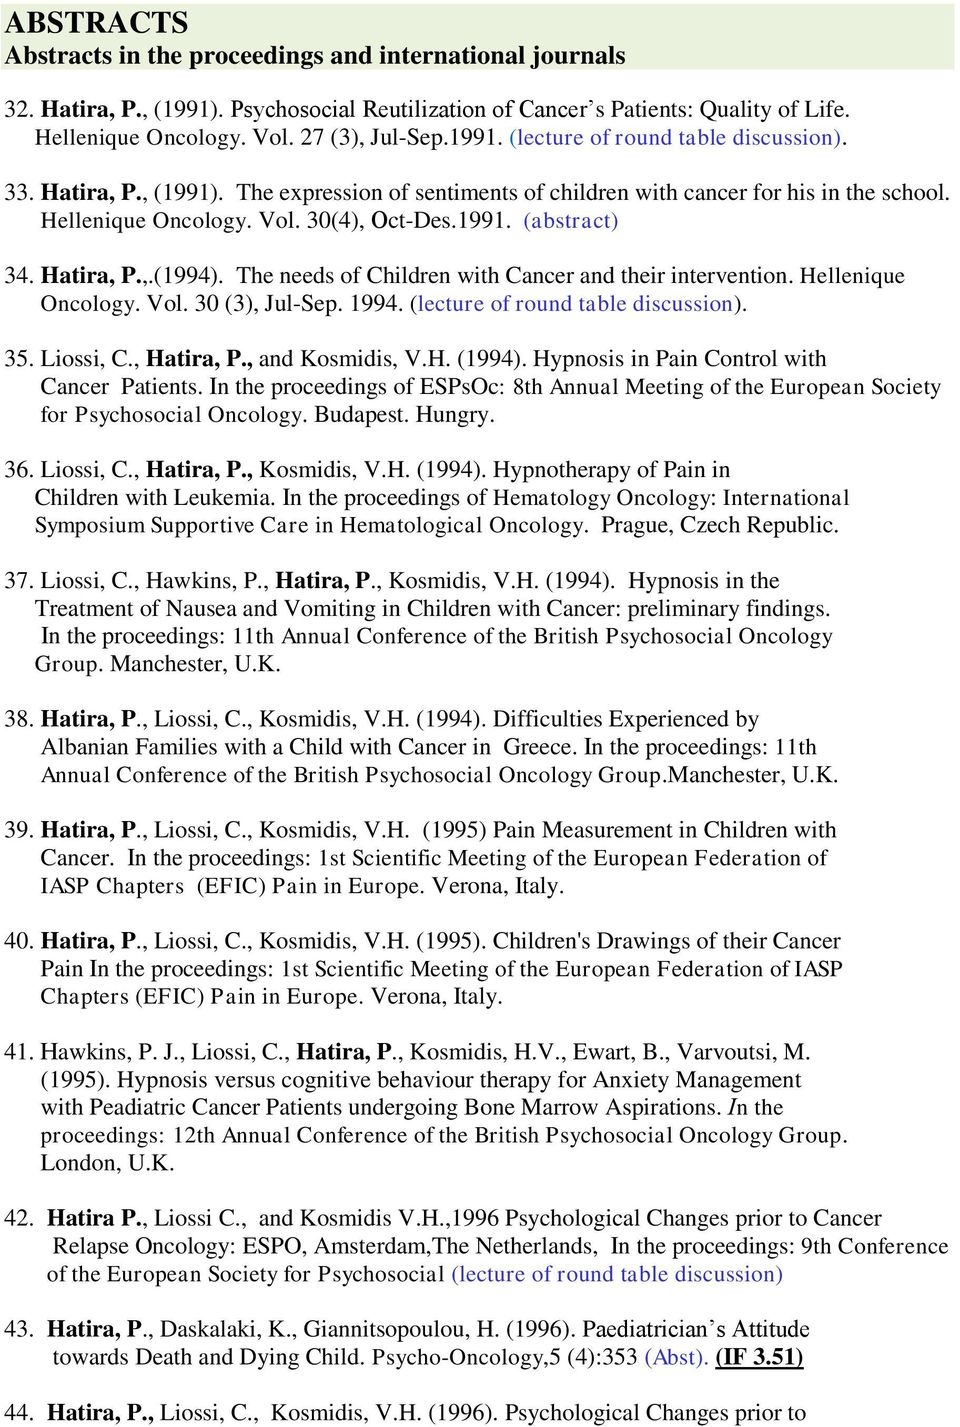 Hatira, P.,.(1994). The needs of Children with Cancer and their intervention. Hellenique Oncology. Vol. 30 (3), Jul-Sep. 1994. (lecture of round table discussion). 35. Liossi, C., Hatira, P.